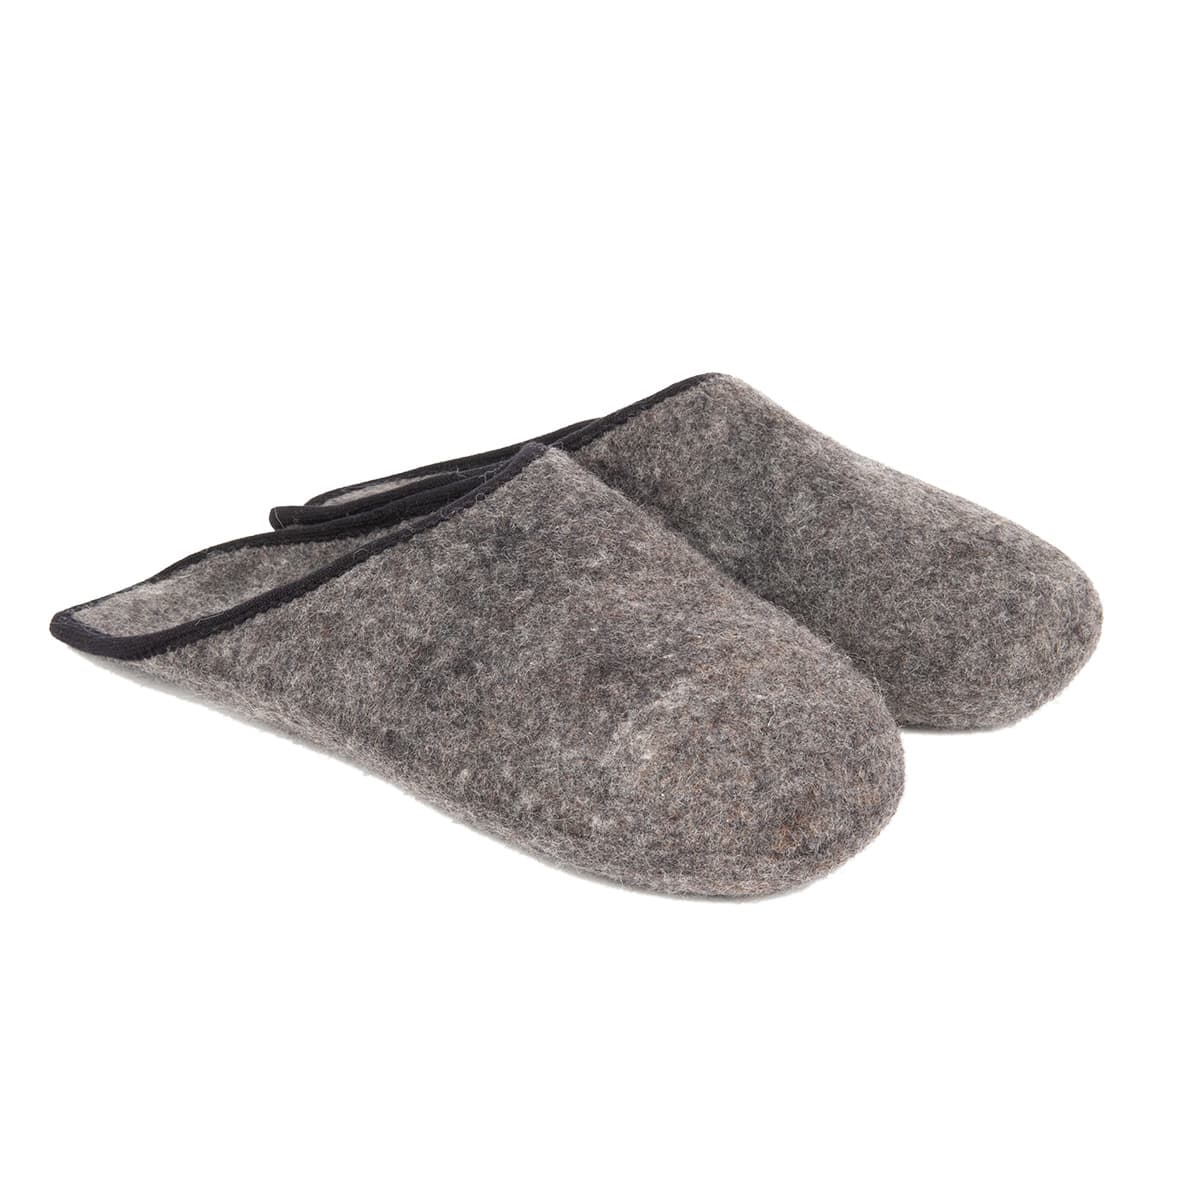 Slippers in pure wool felt to use as 